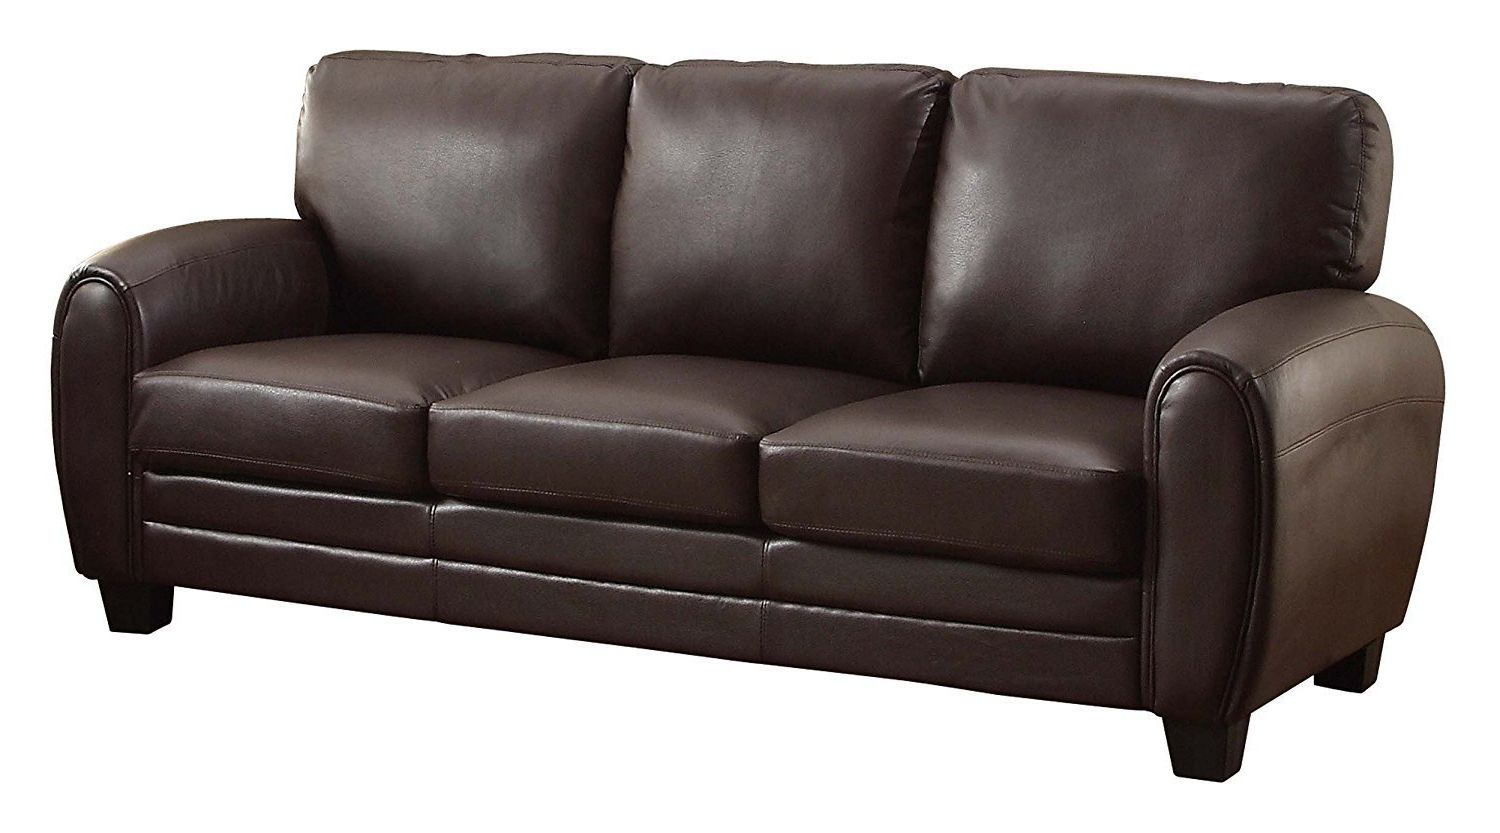 Brown Faux Leather Couch – Home Furniture Design Regarding Faux Leather Sofas In Chocolate Brown (View 15 of 20)